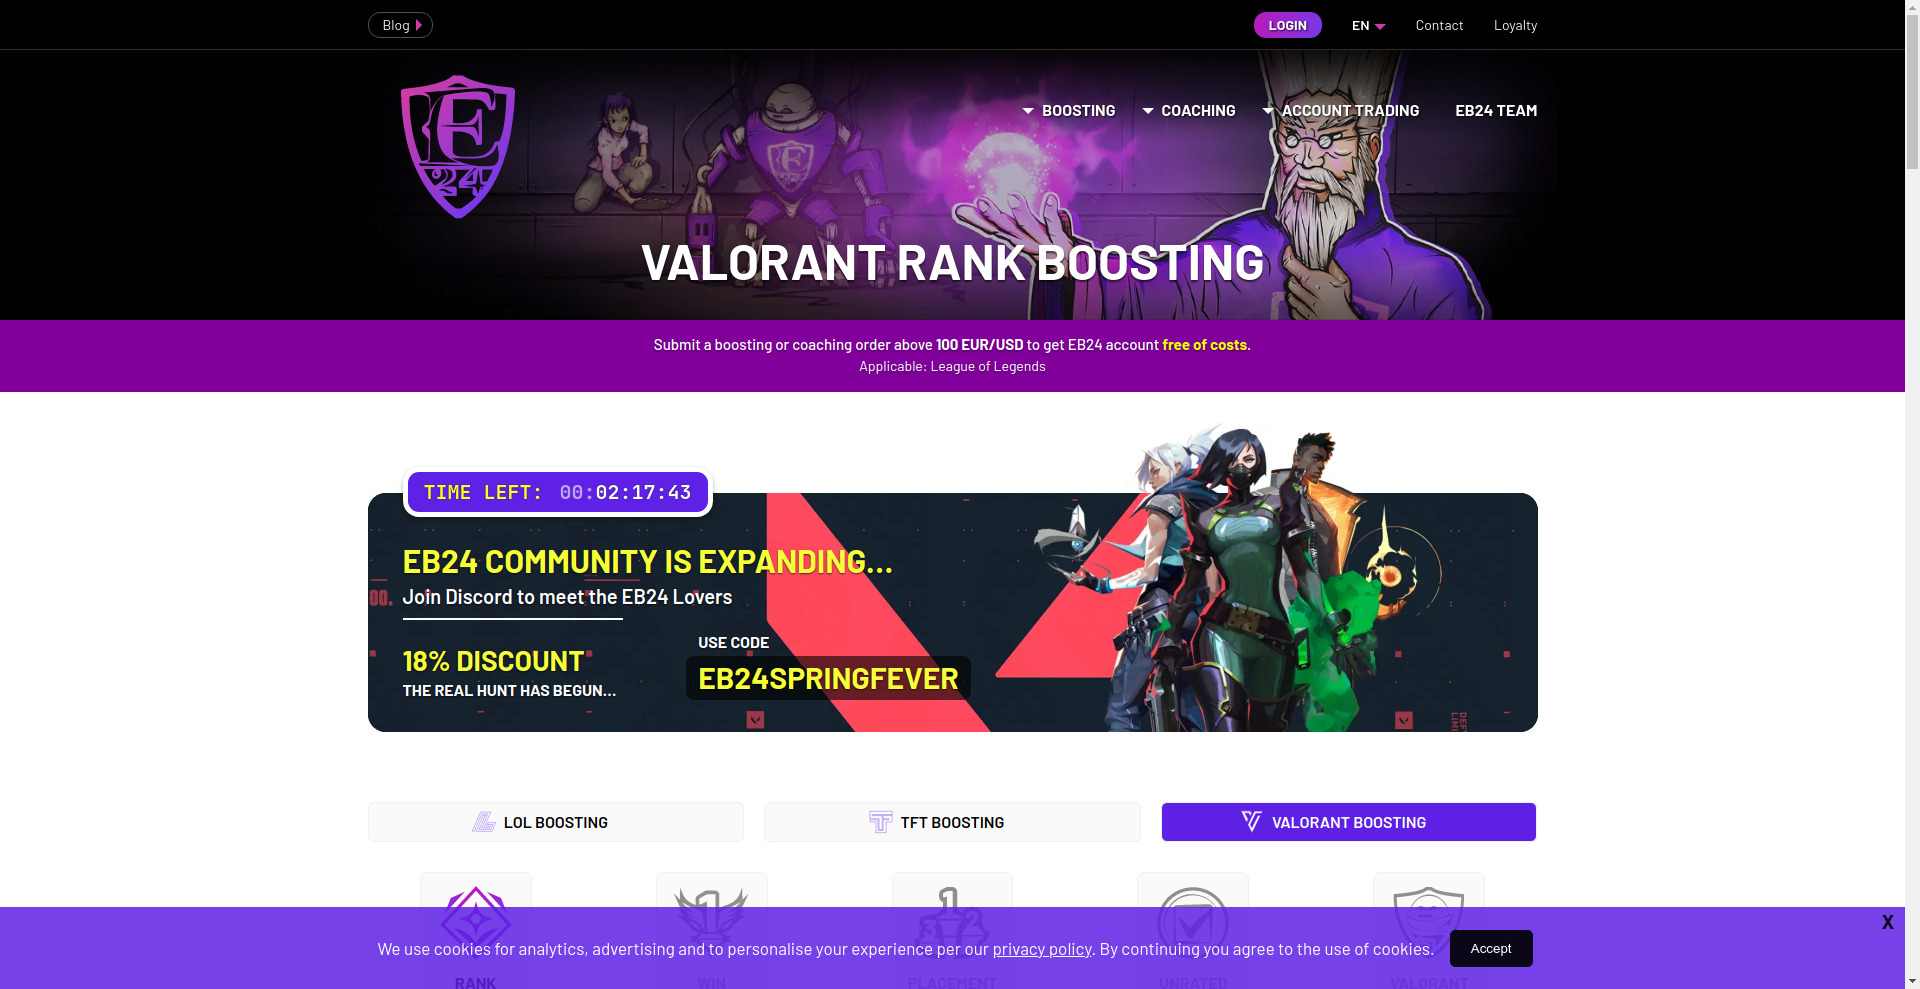 Boosting] ⭐GGBoost Valorant Boosting⭐Next Generation ELO Boost -  Professional Service - 24/7 Support